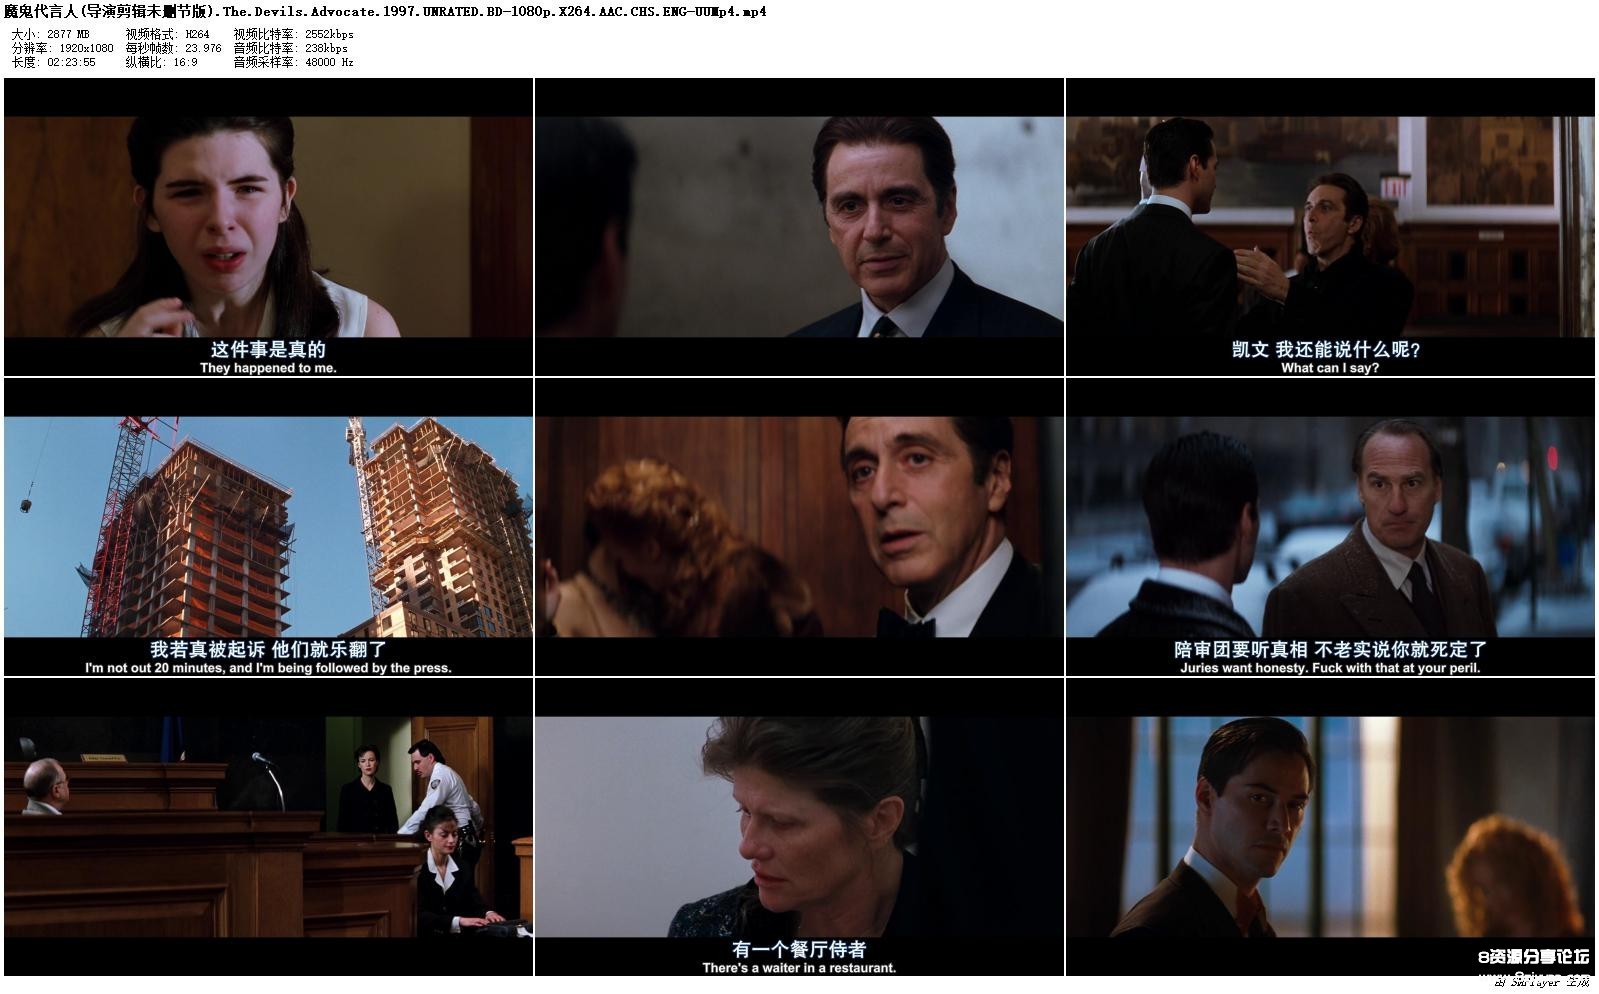 .The.Devils.Advocate.1997.UNRATED.BD-1080p.X264.AAC.CHS.ENG-UUMp4_previewad36b9392a073b85.jpg